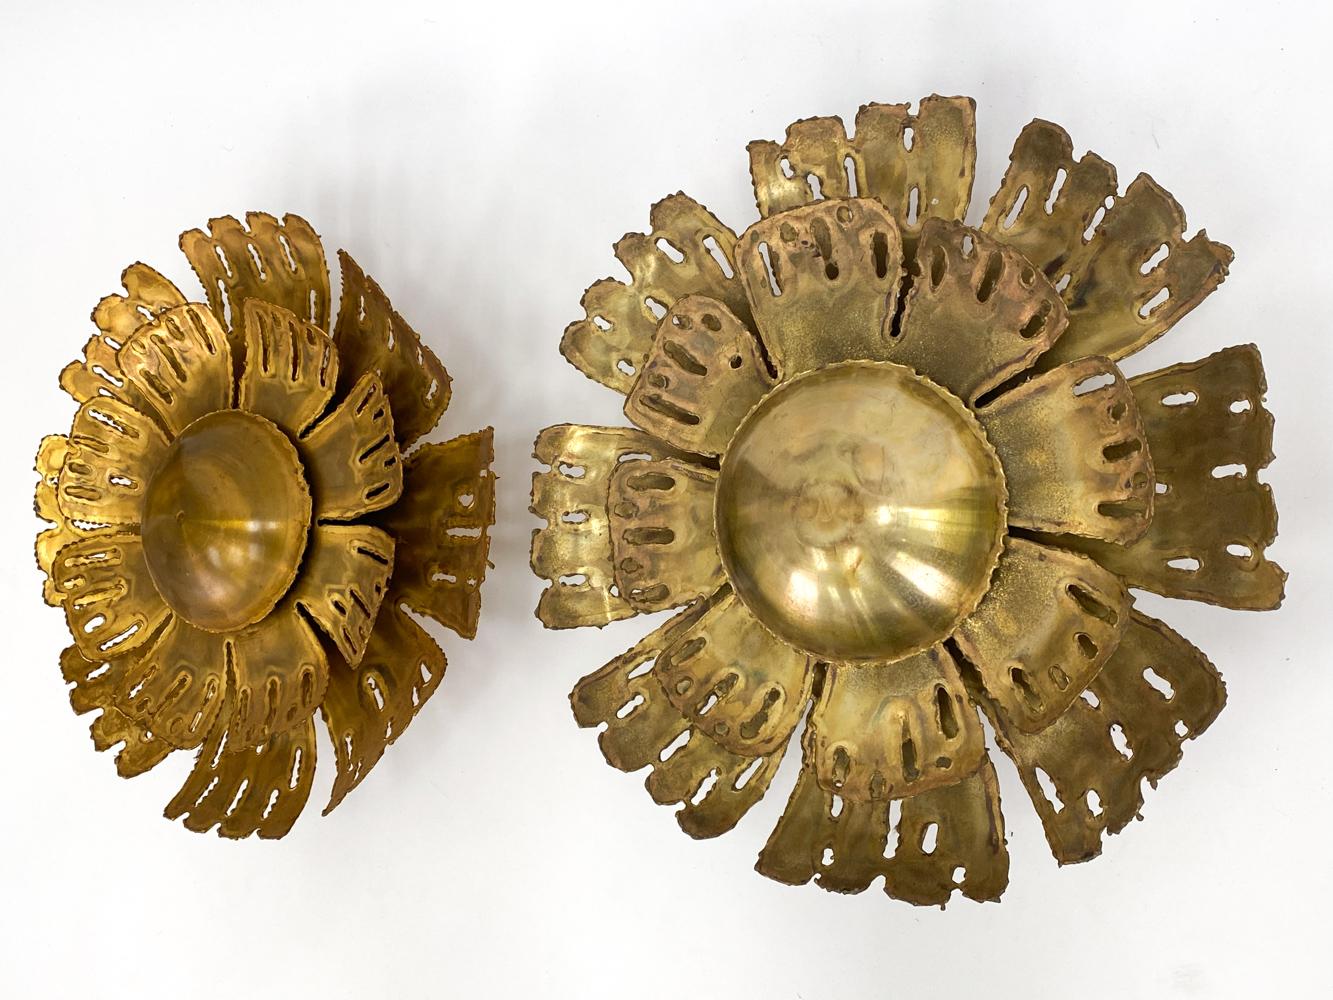 Add bold and playful glamor to your space with this exquisite pair of sconces, crafted from torch-cut brass in the form of blooming flowers, designed by Svend Aage Holm Sørensen and produced by his firm Holm Sørensen & Pedersen Belysning in the